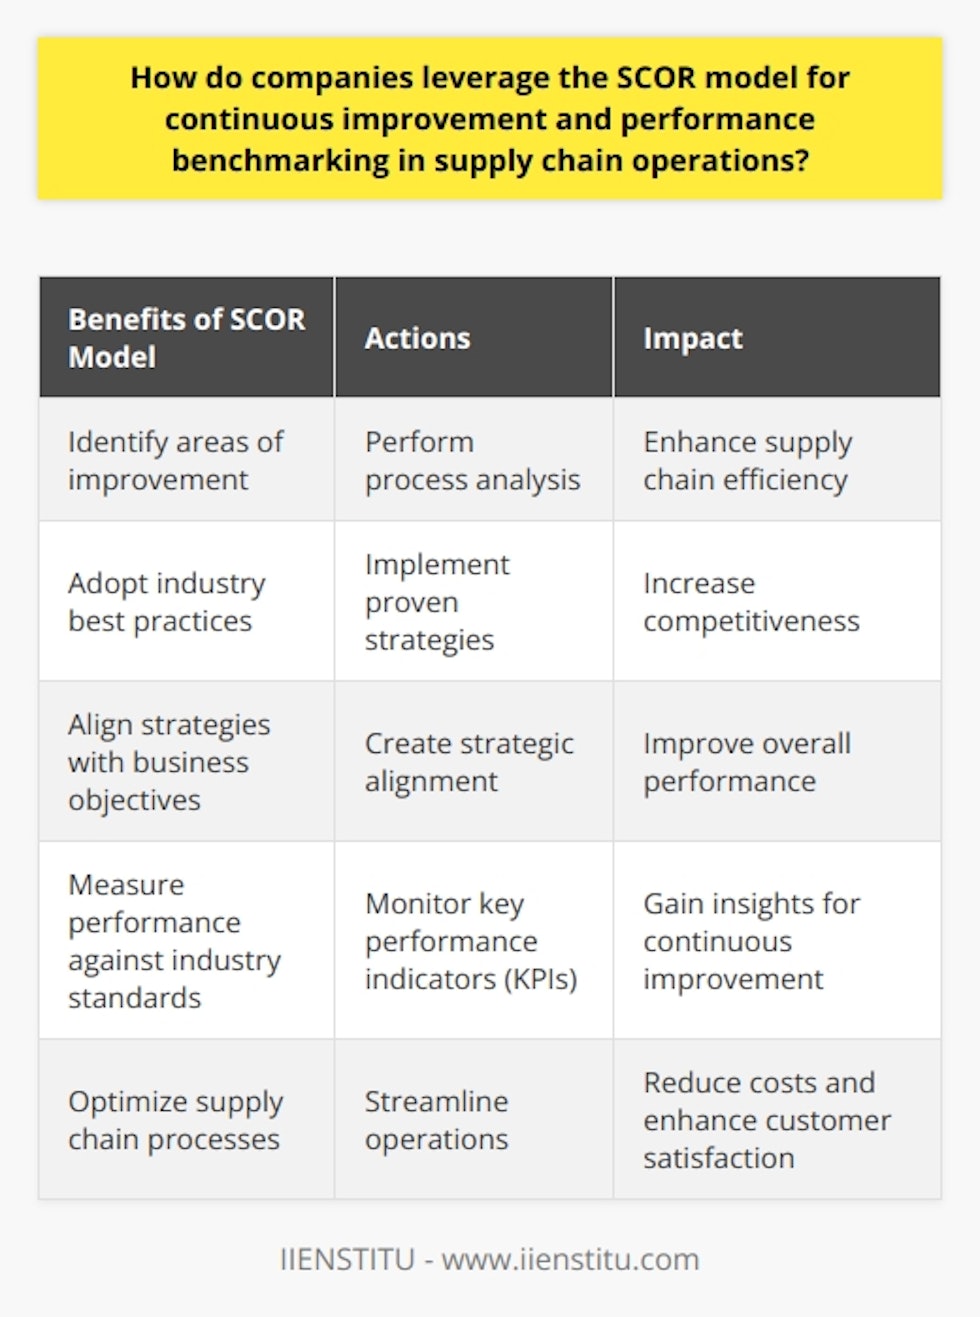 The SCOR model is a valuable tool for companies looking to improve and benchmark their supply chain operations. By utilizing this model, businesses can identify areas of improvement, adopt industry best practices, align strategies with business objectives, and measure performance against industry standards. This holistic approach allows organizations to optimize their supply chain processes, enhance overall performance, and drive business success.